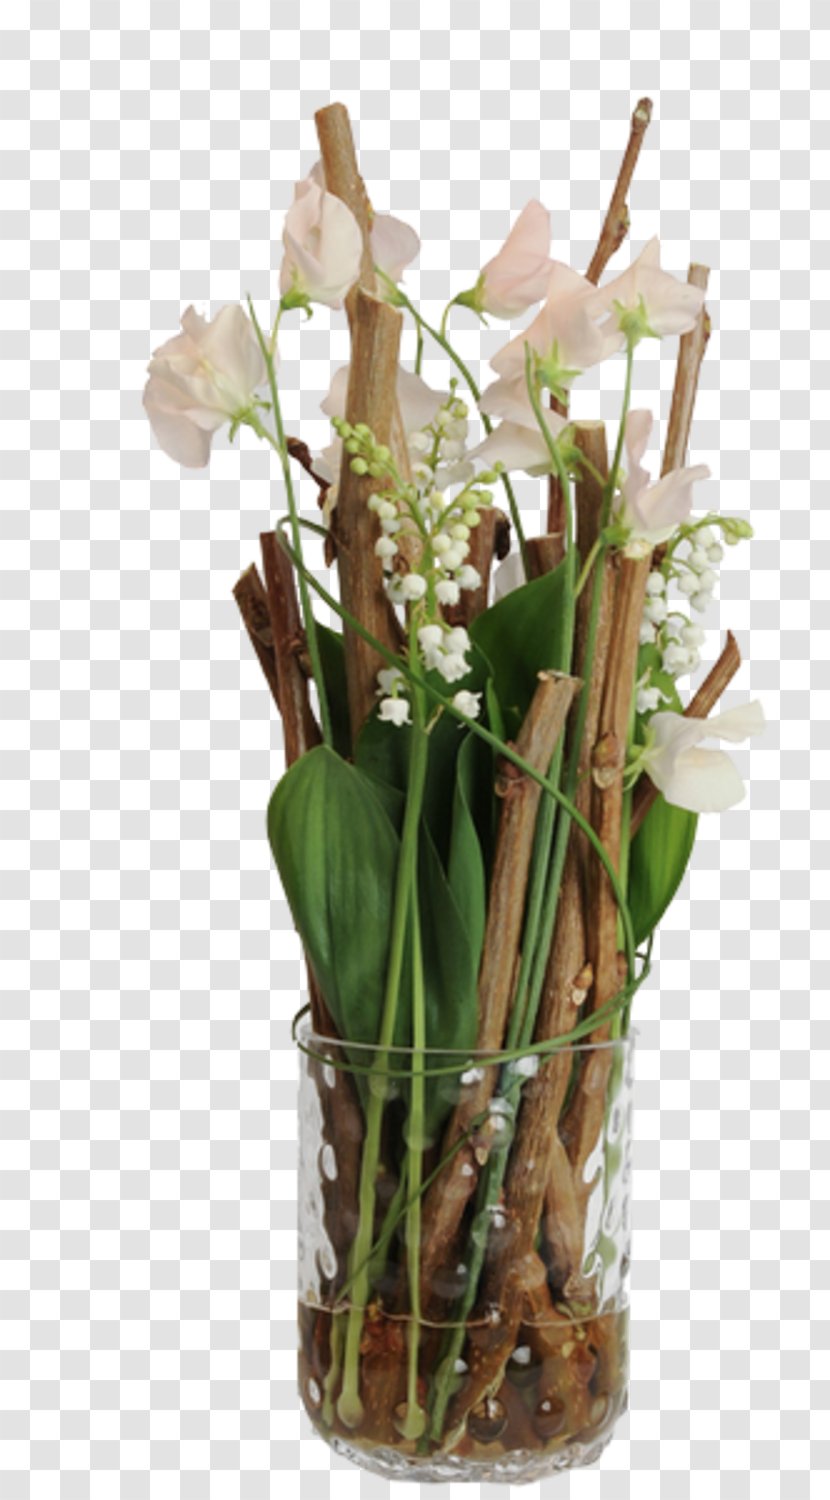 Floral Design Lily Of The Valley Cut Flowers Vase - May Transparent PNG